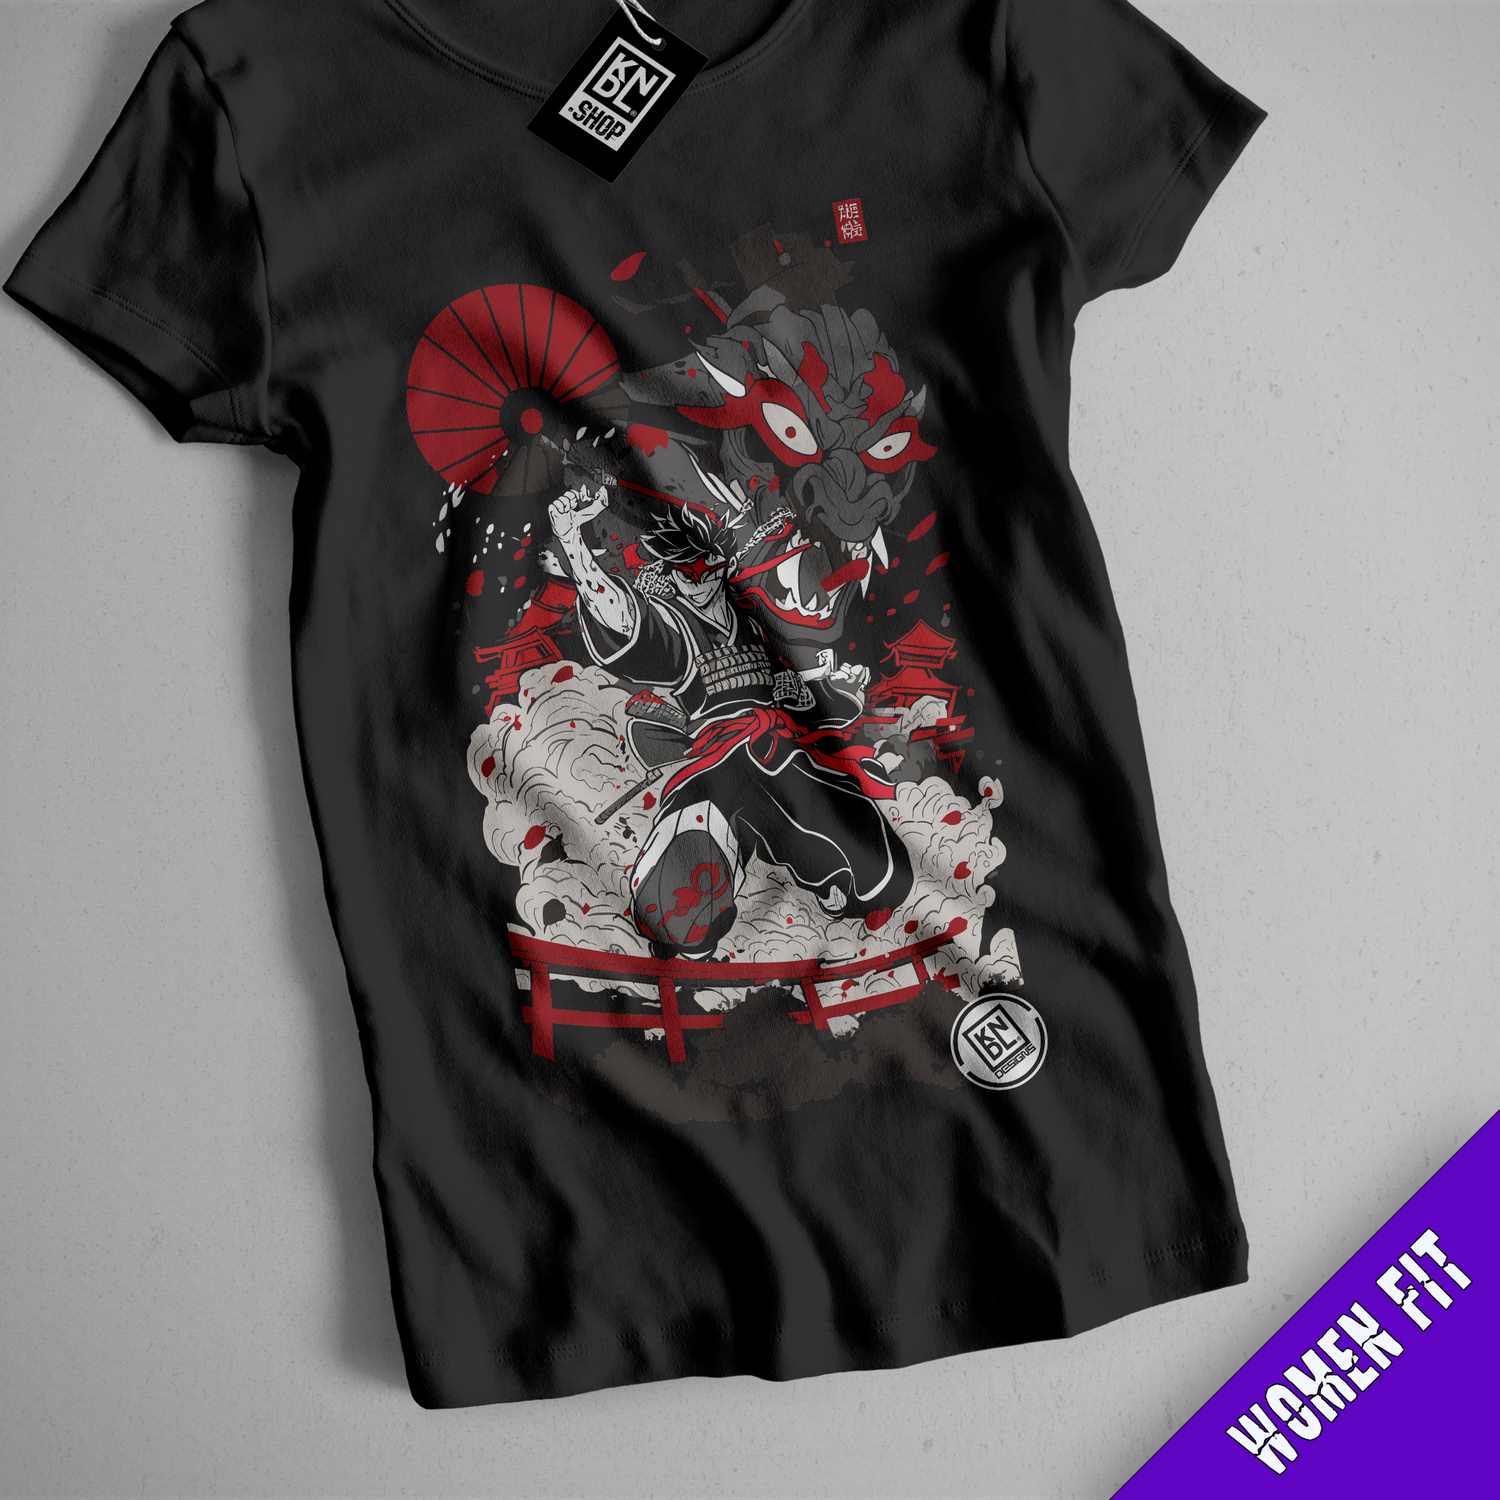 a black t - shirt with a picture of a demon riding a motorcycle